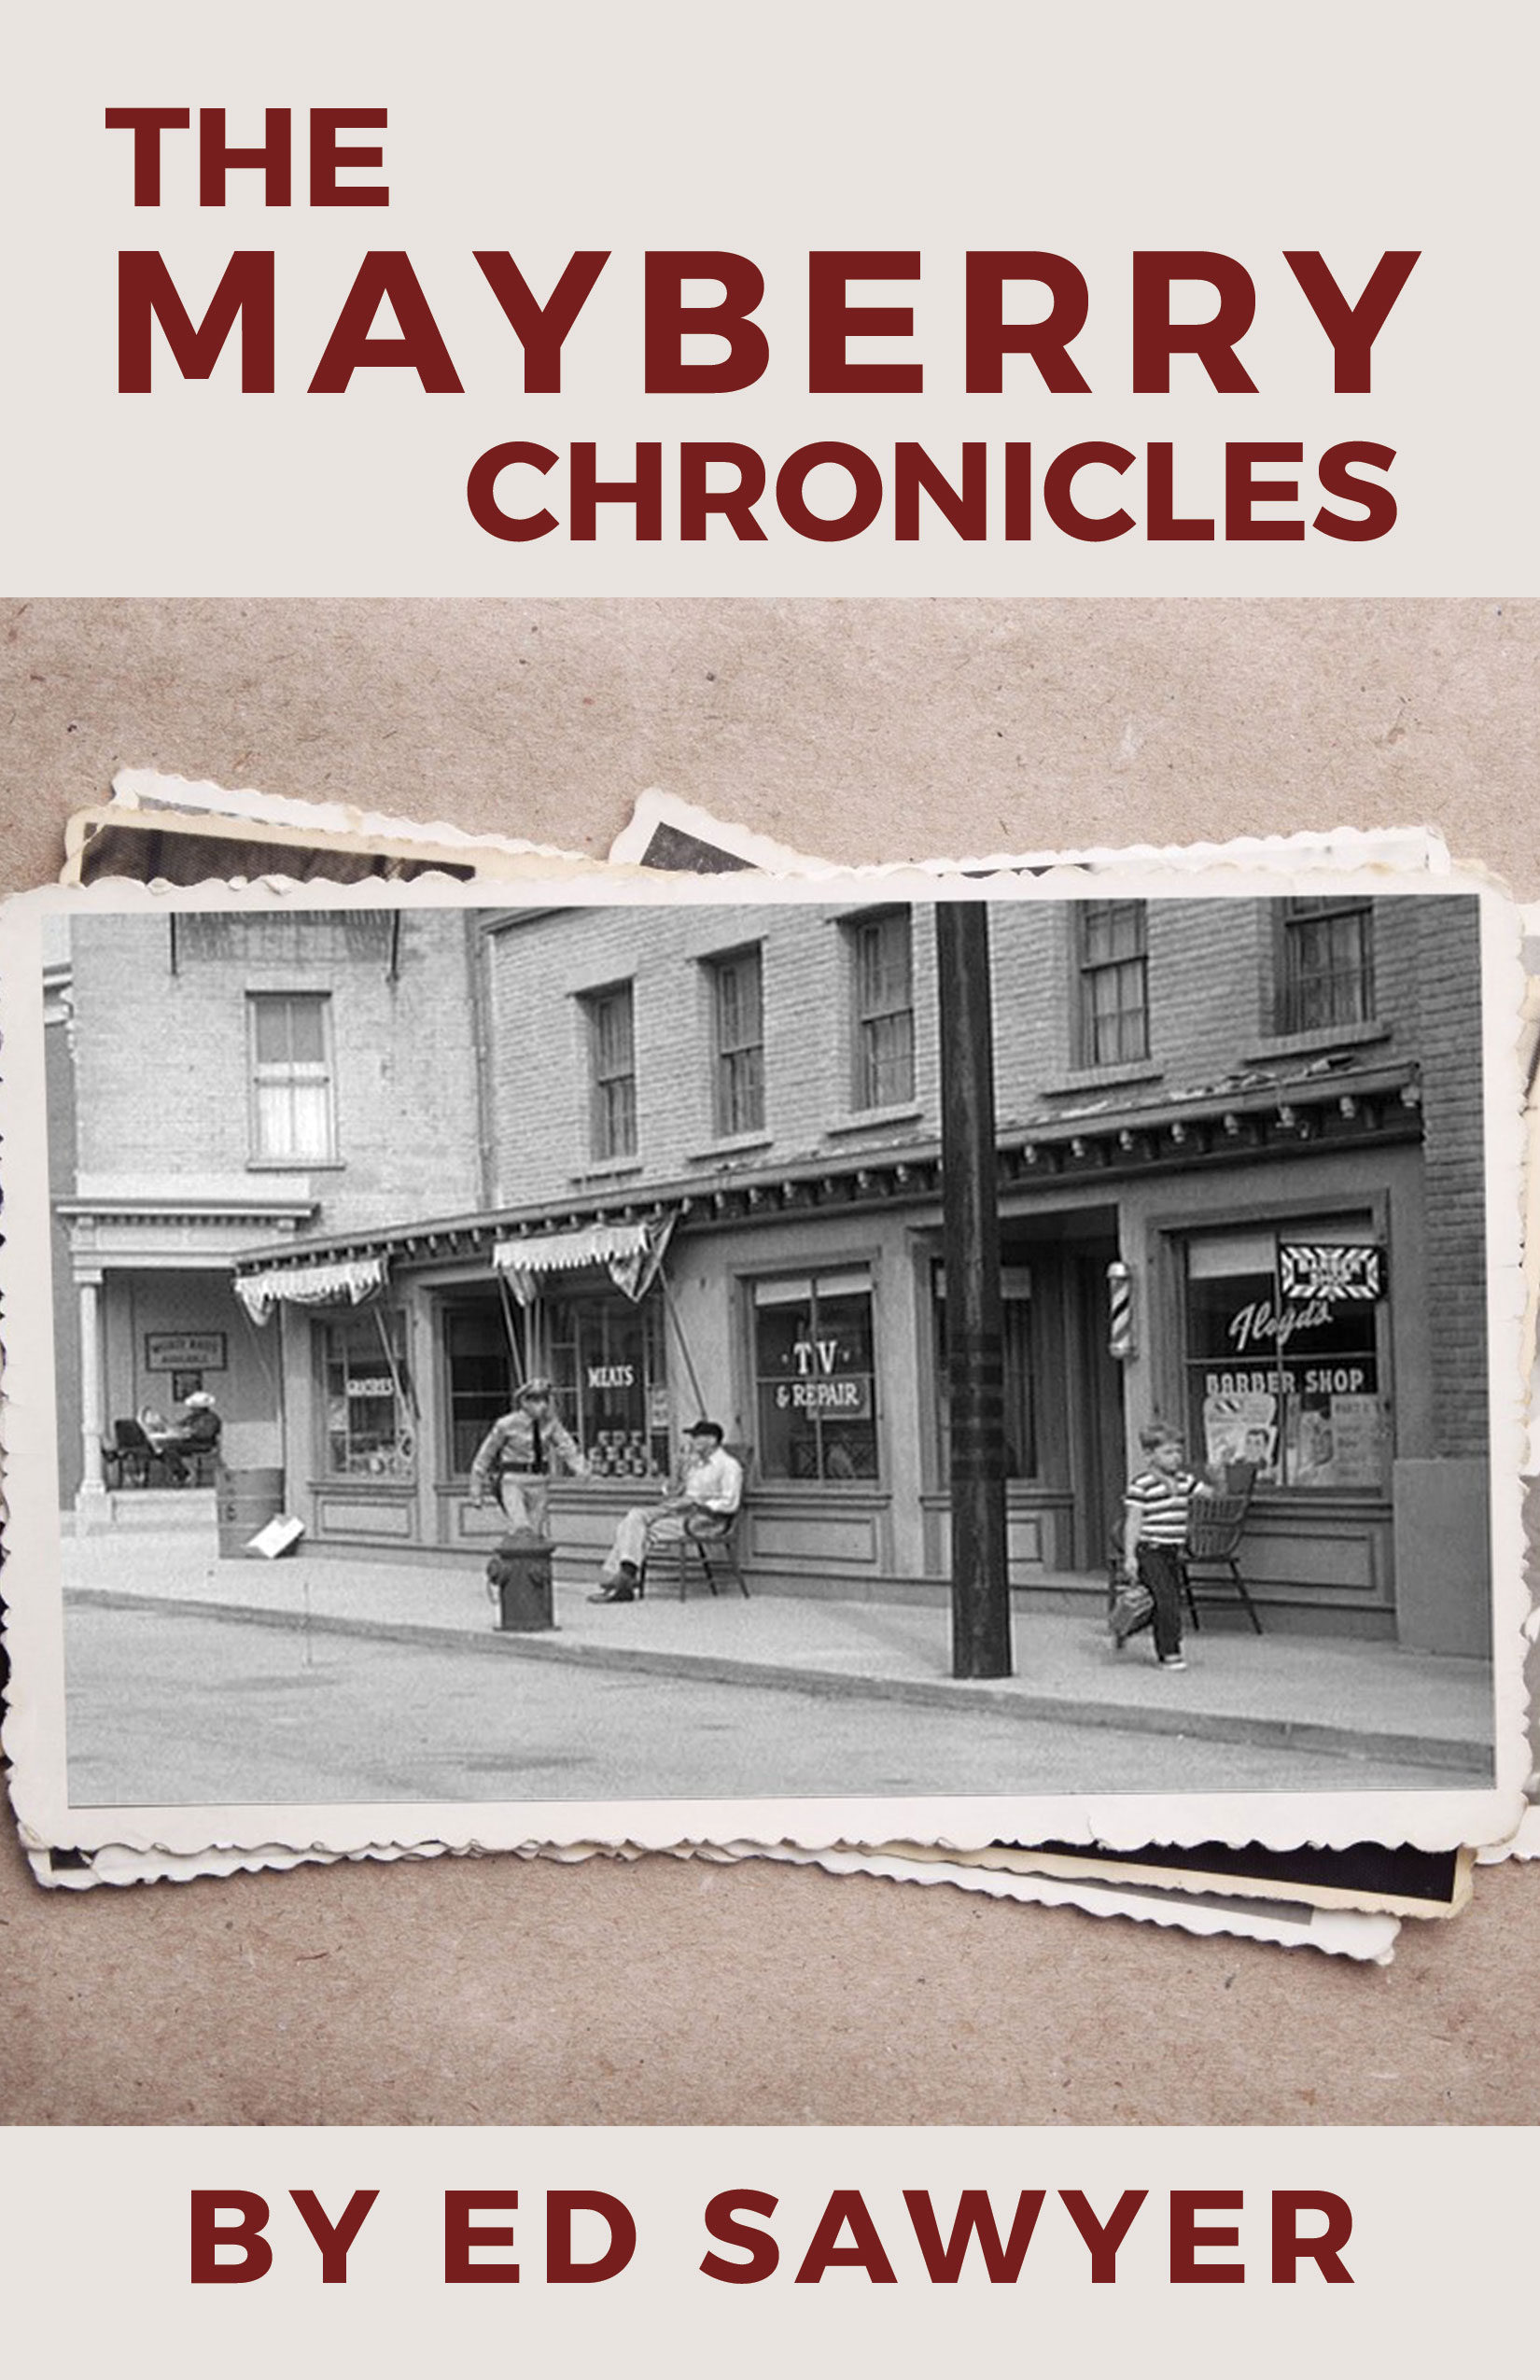 THE MAYBERRY CHRONICLES Excerpt